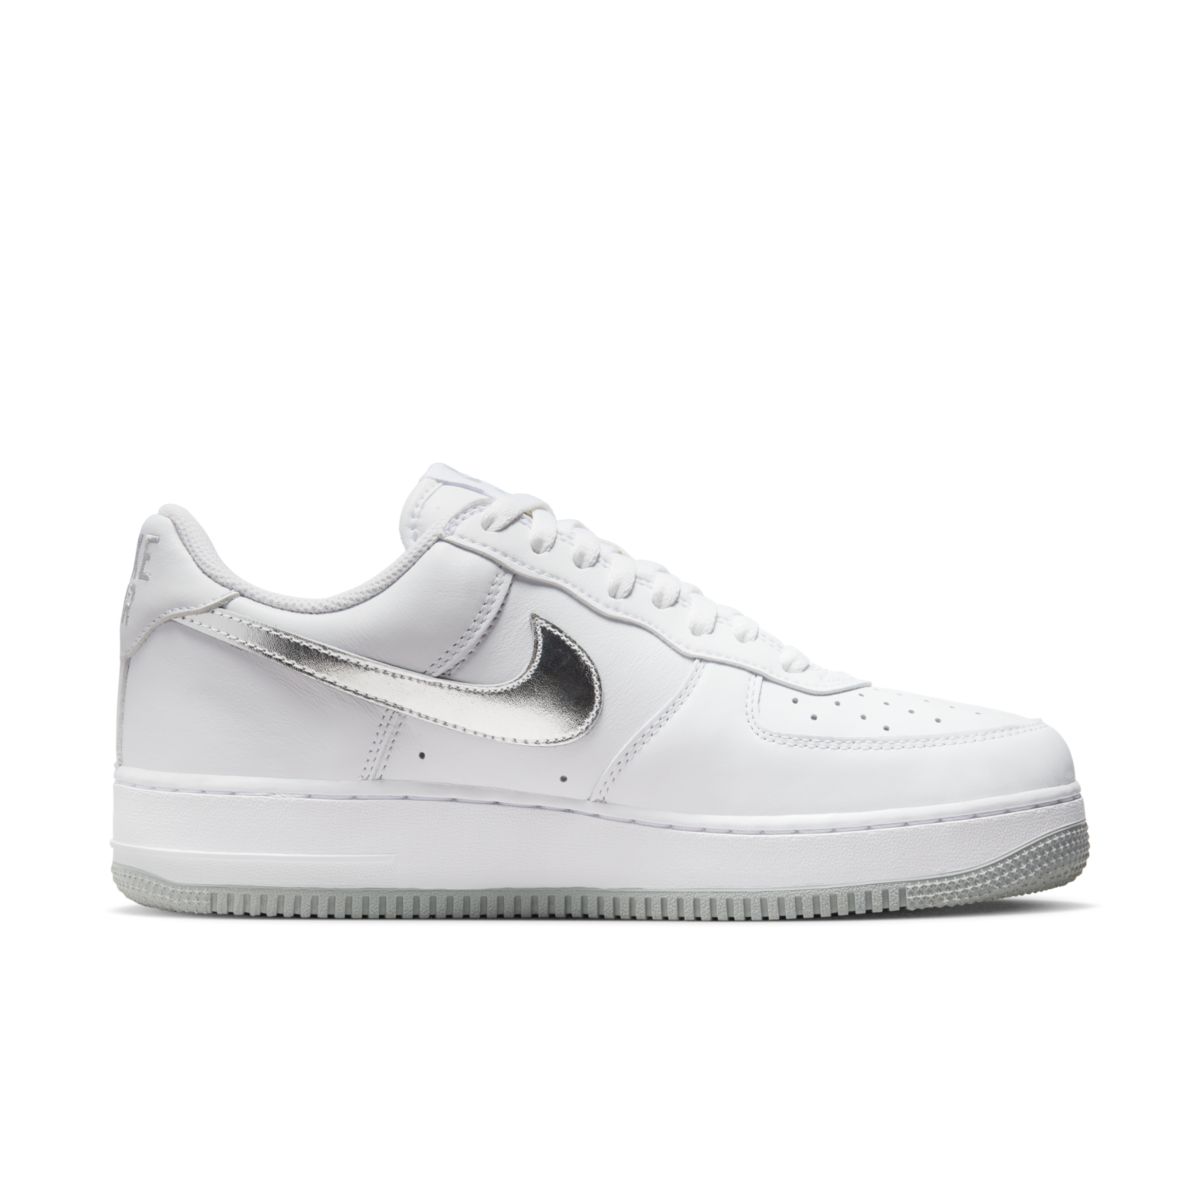 Nike Air Force 1 Low Metallic Silver Color of the Month DZ6755-100 3